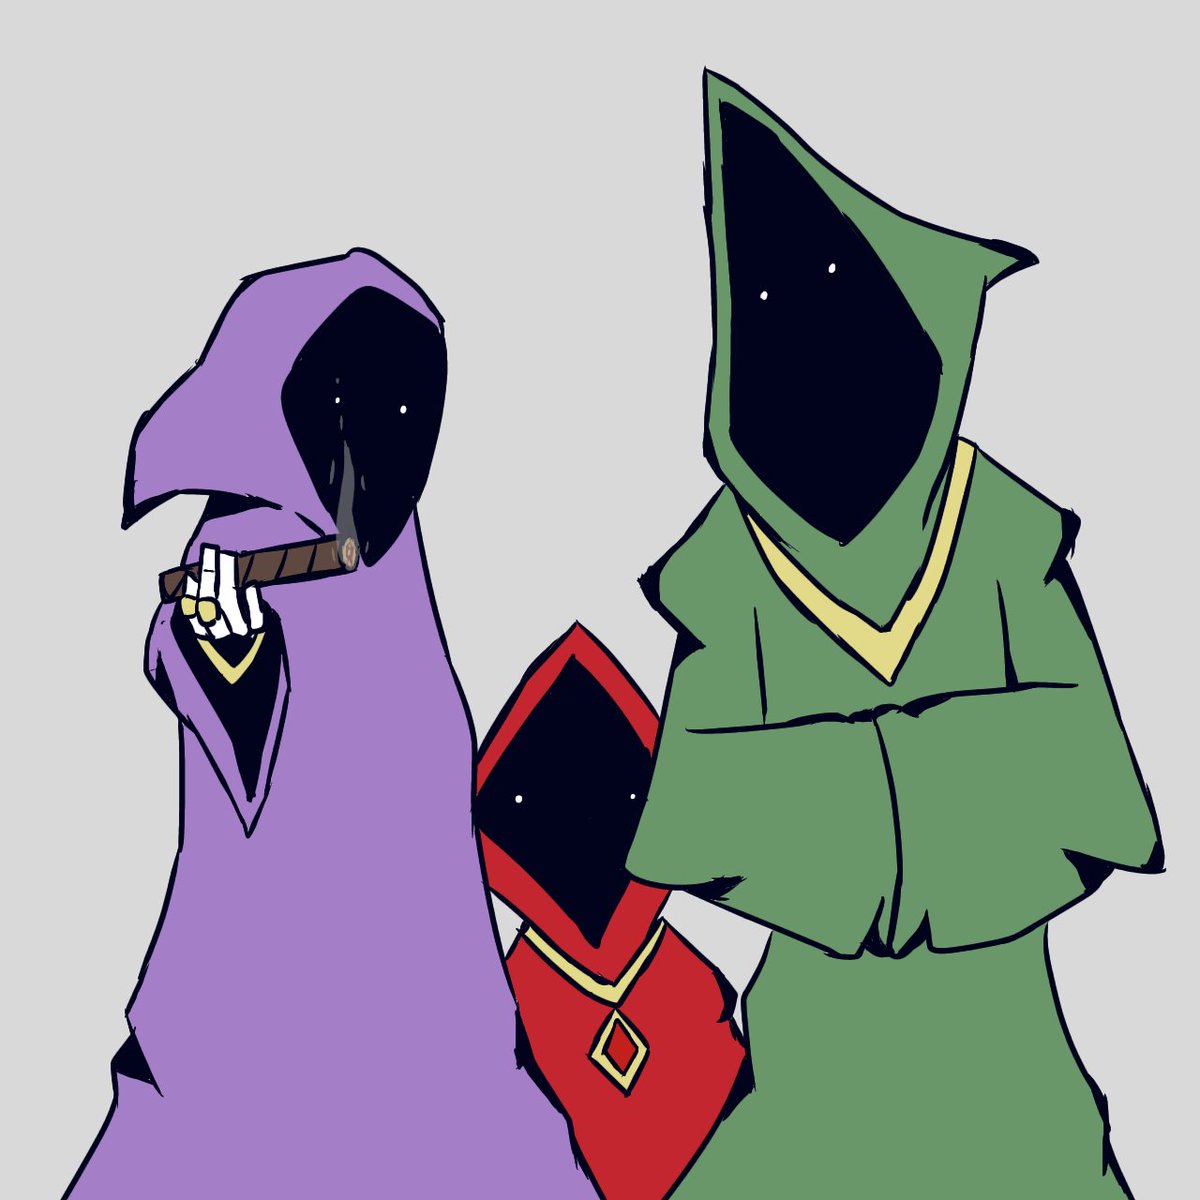 SHADOW WIZARD MONEY GANG
THEY OFFER YOU THE BLUNT
DO YOU ACCEPT??